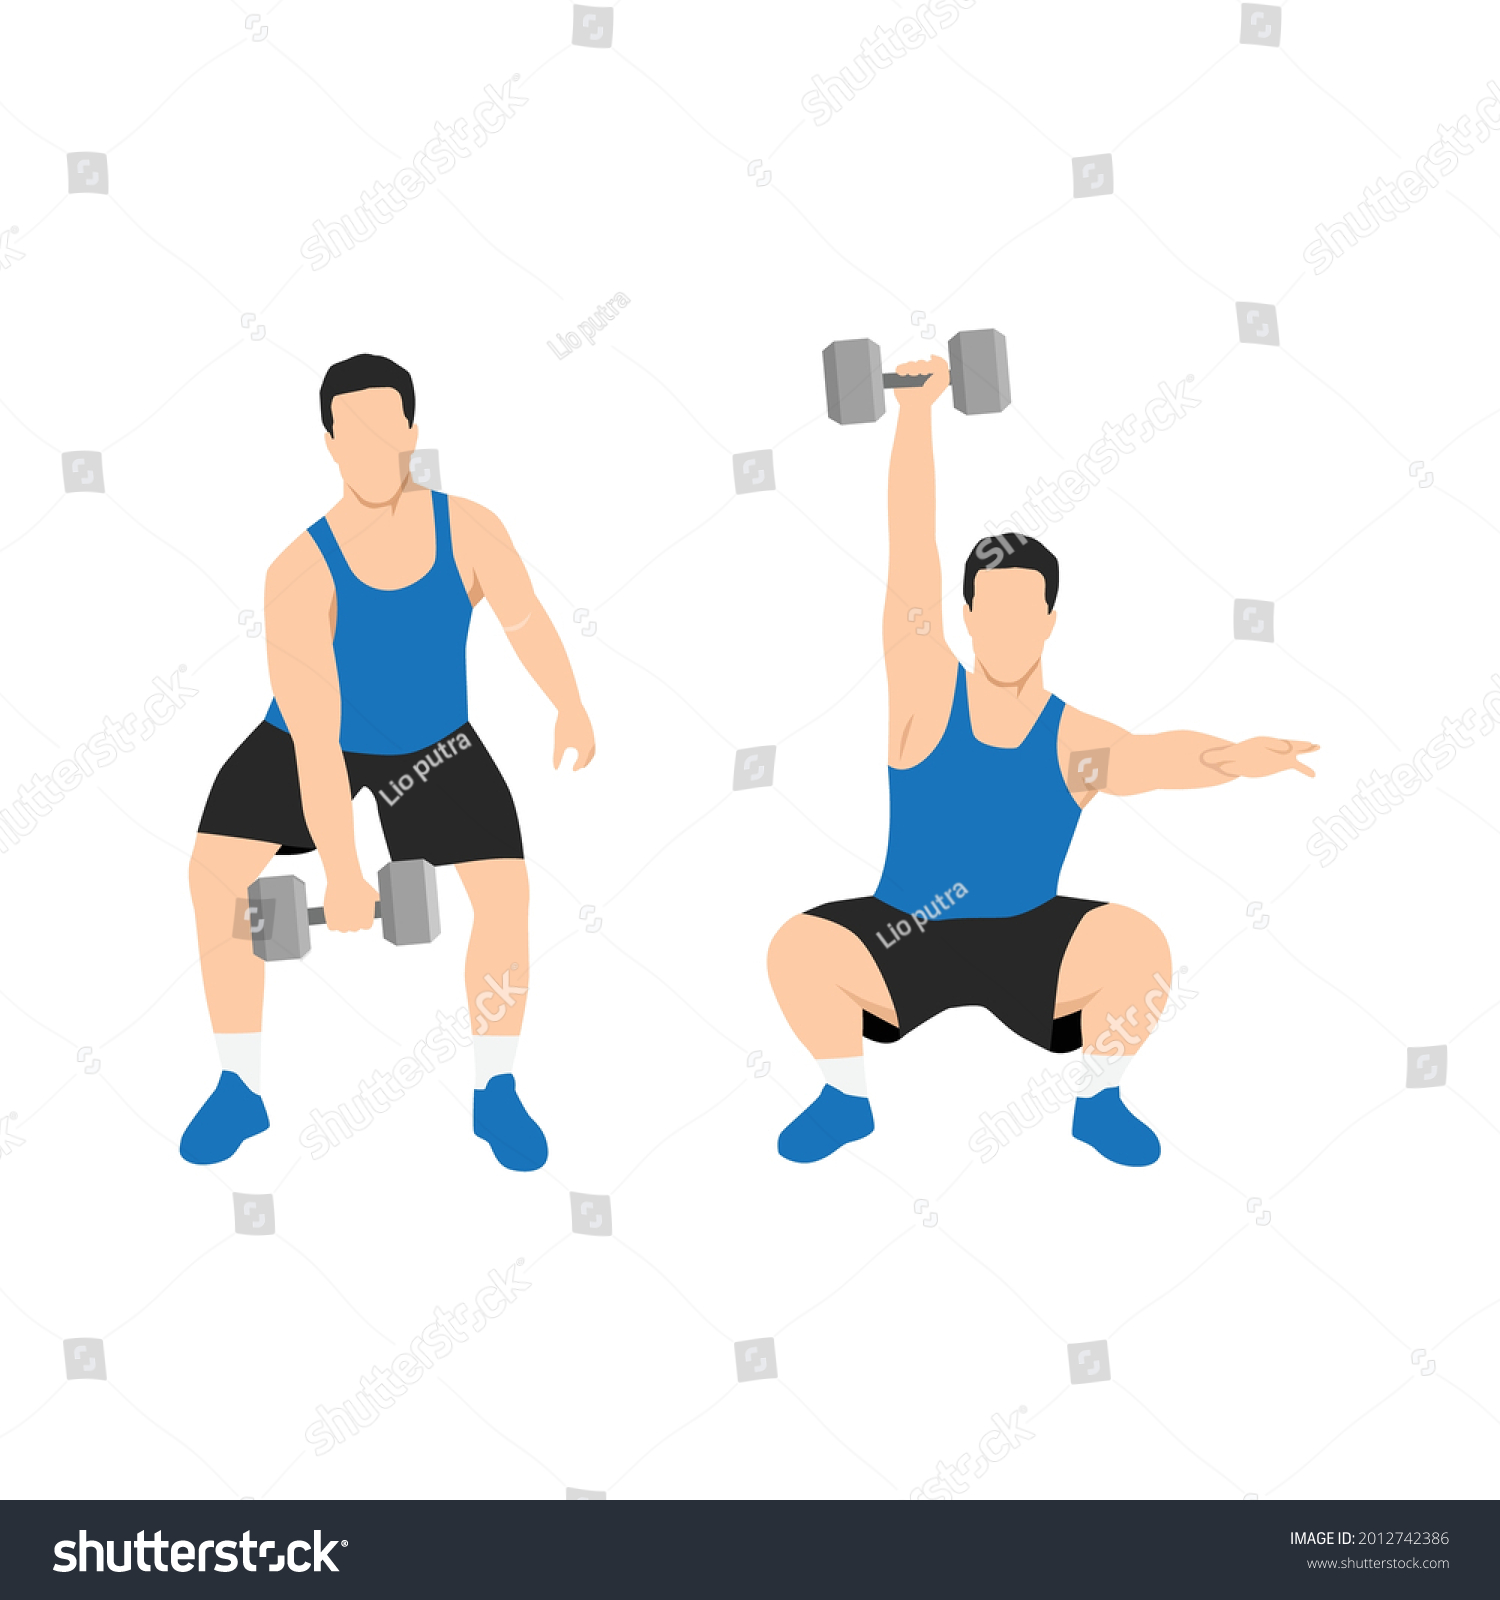 SVG of Man doing dumbbell hang snatch exercise. Flat vector illustration isolated on white background svg